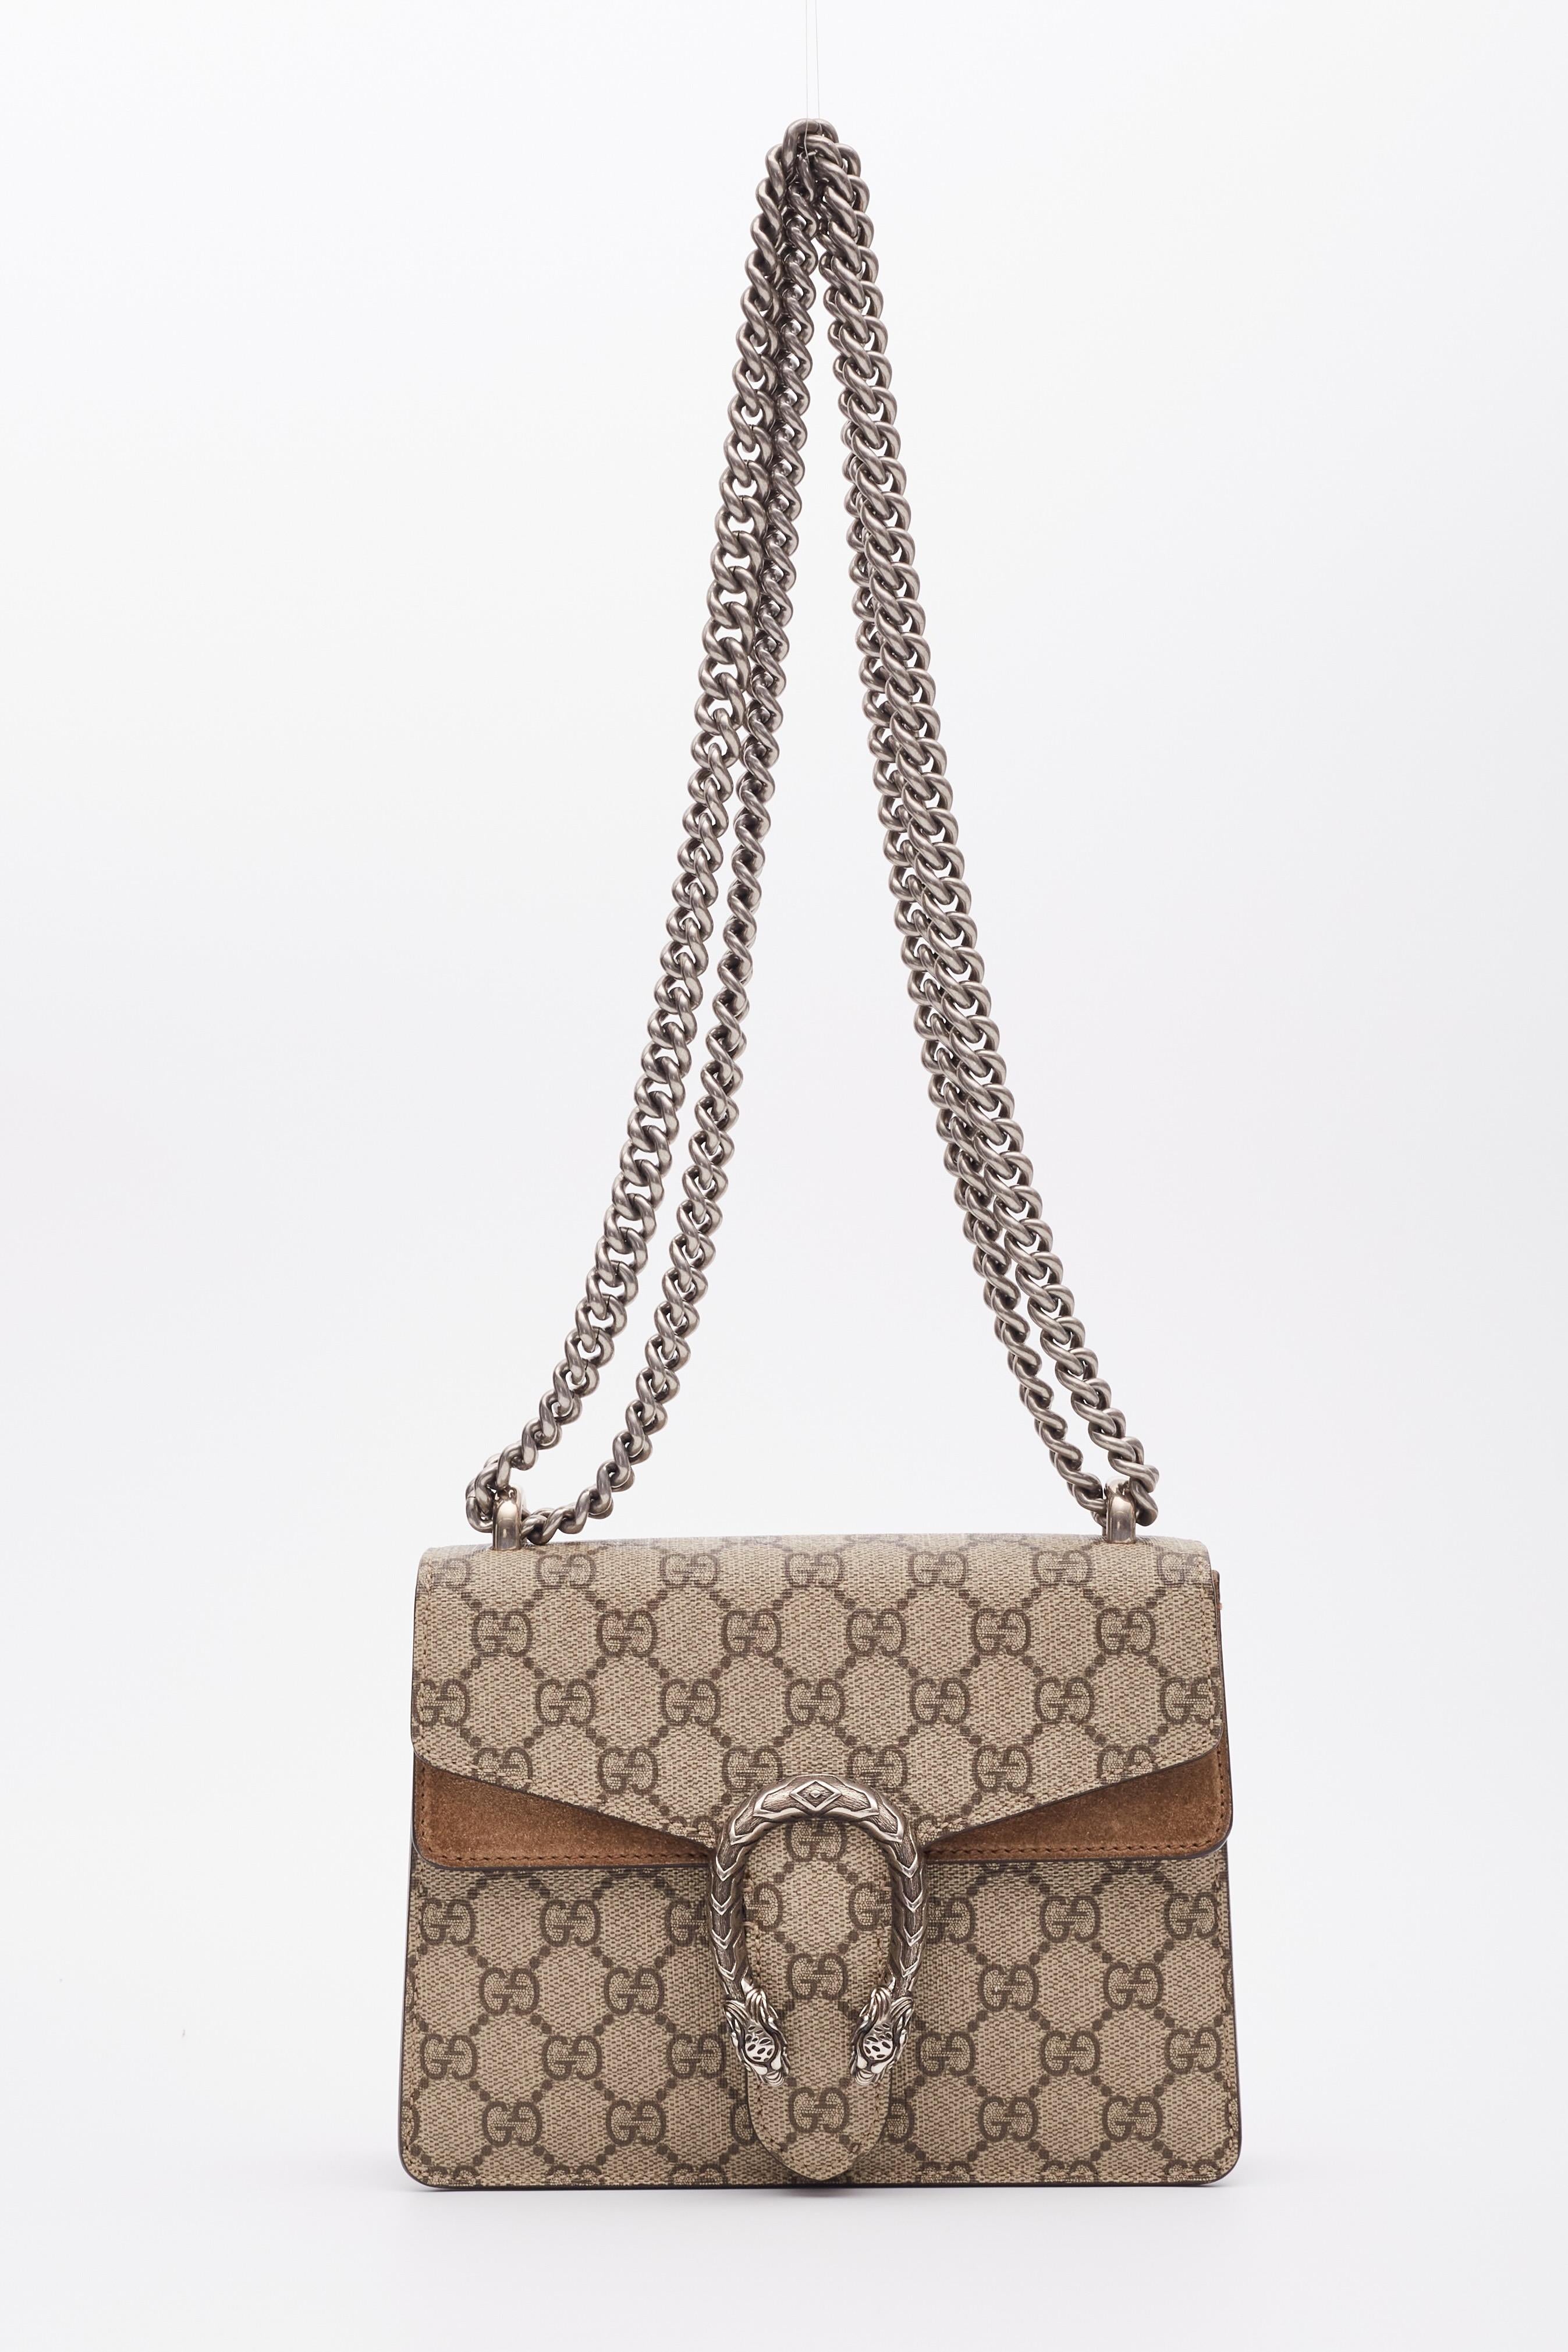 Gucci GG Supreme Ebony Monogram Dionysus Mini Bag (421970) In Good Condition For Sale In Montreal, Quebec